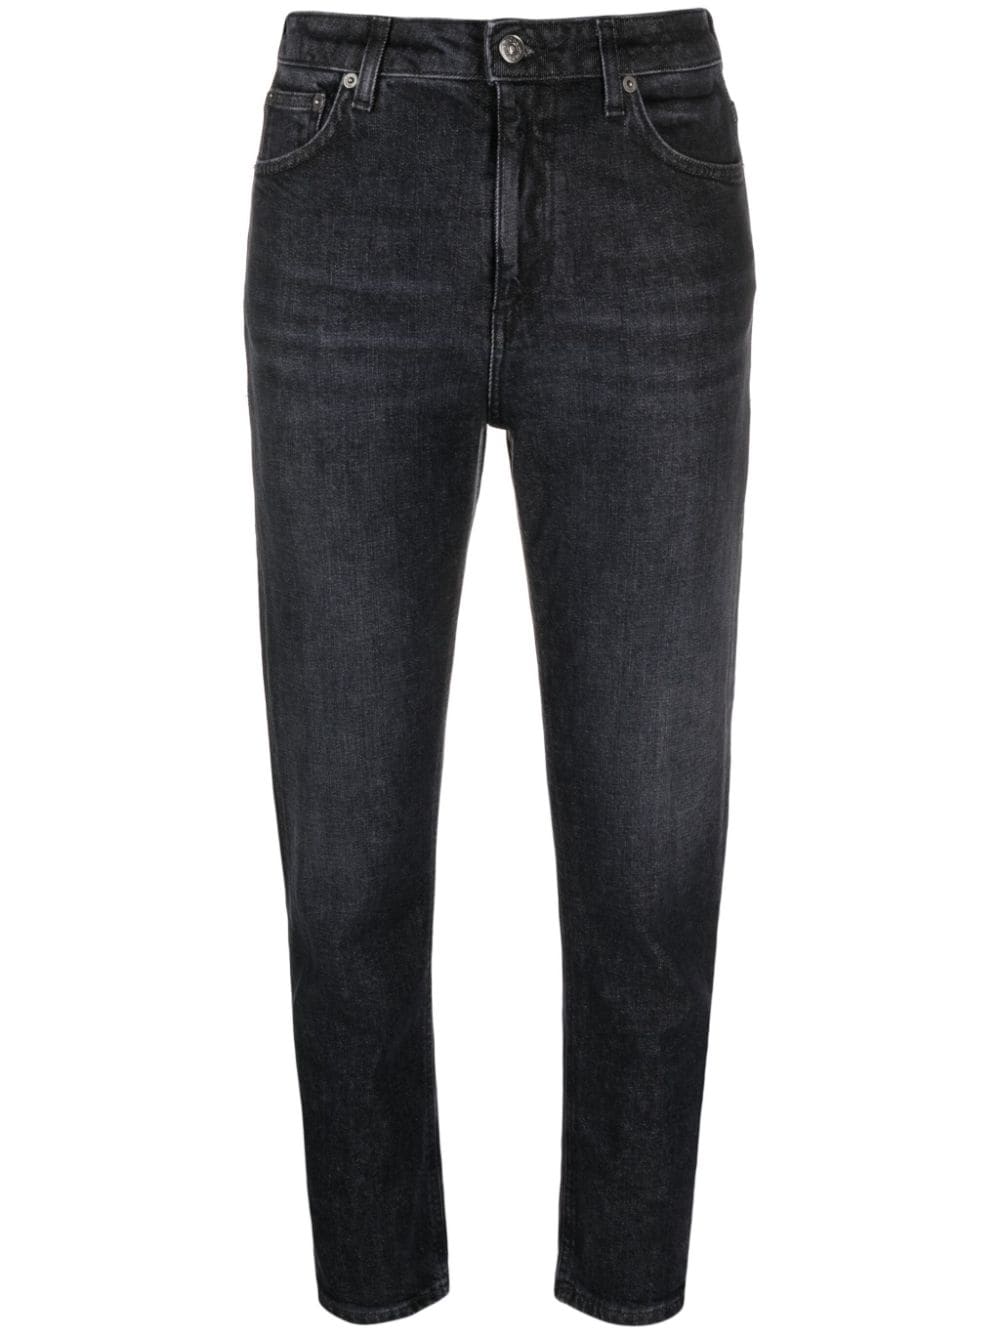 Cindy skinny-cut cropped jeans